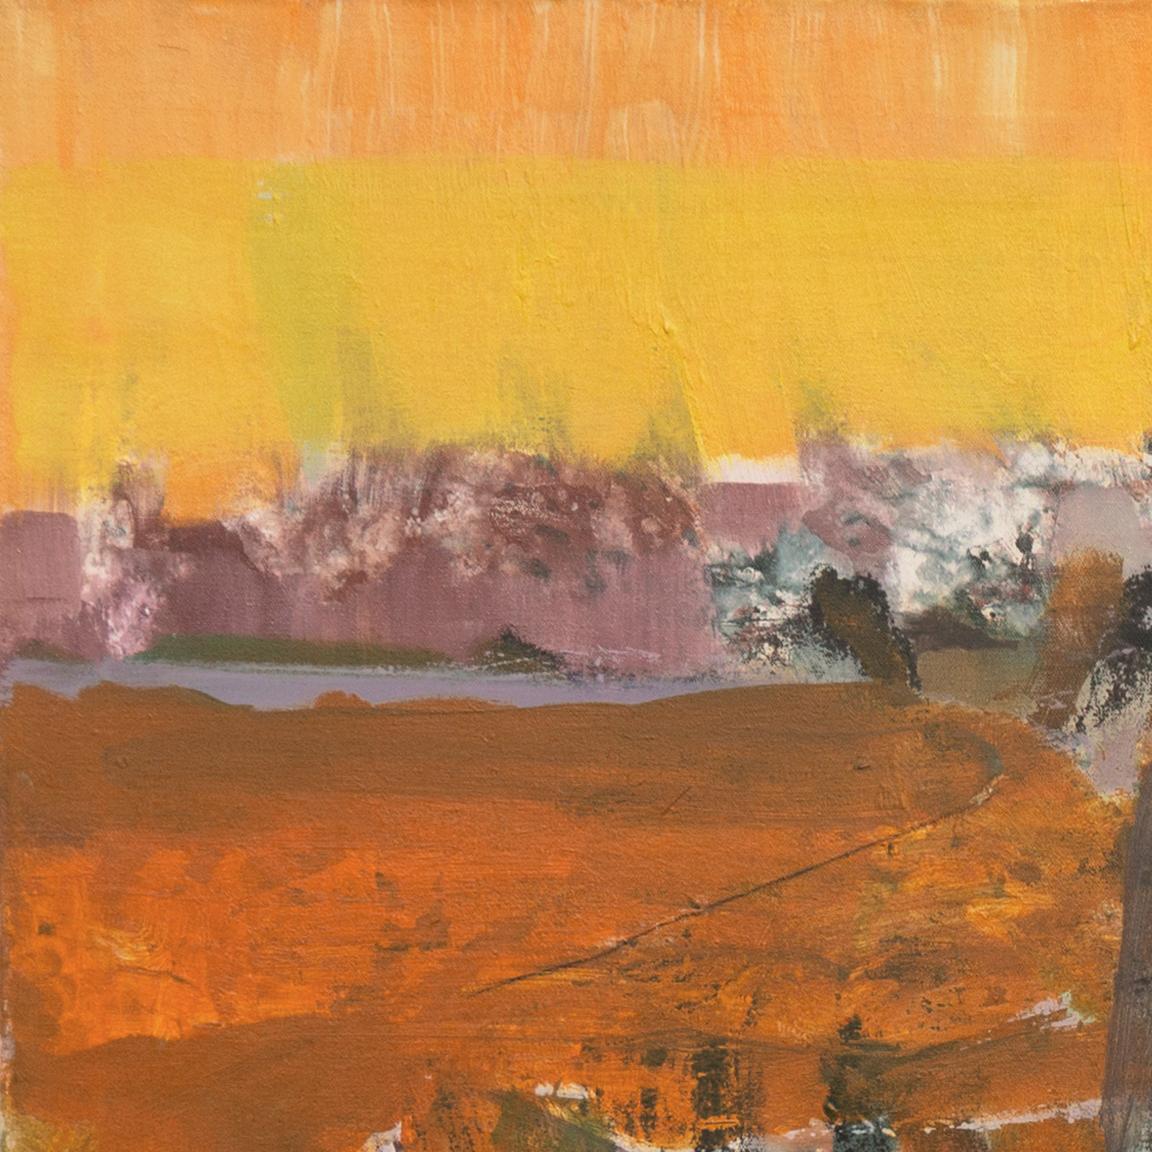 'Canyon River', San Francisco Bay Area Abstraction, Mid-Century, Maxwell Gallery - Brown Abstract Painting by Tom Ide